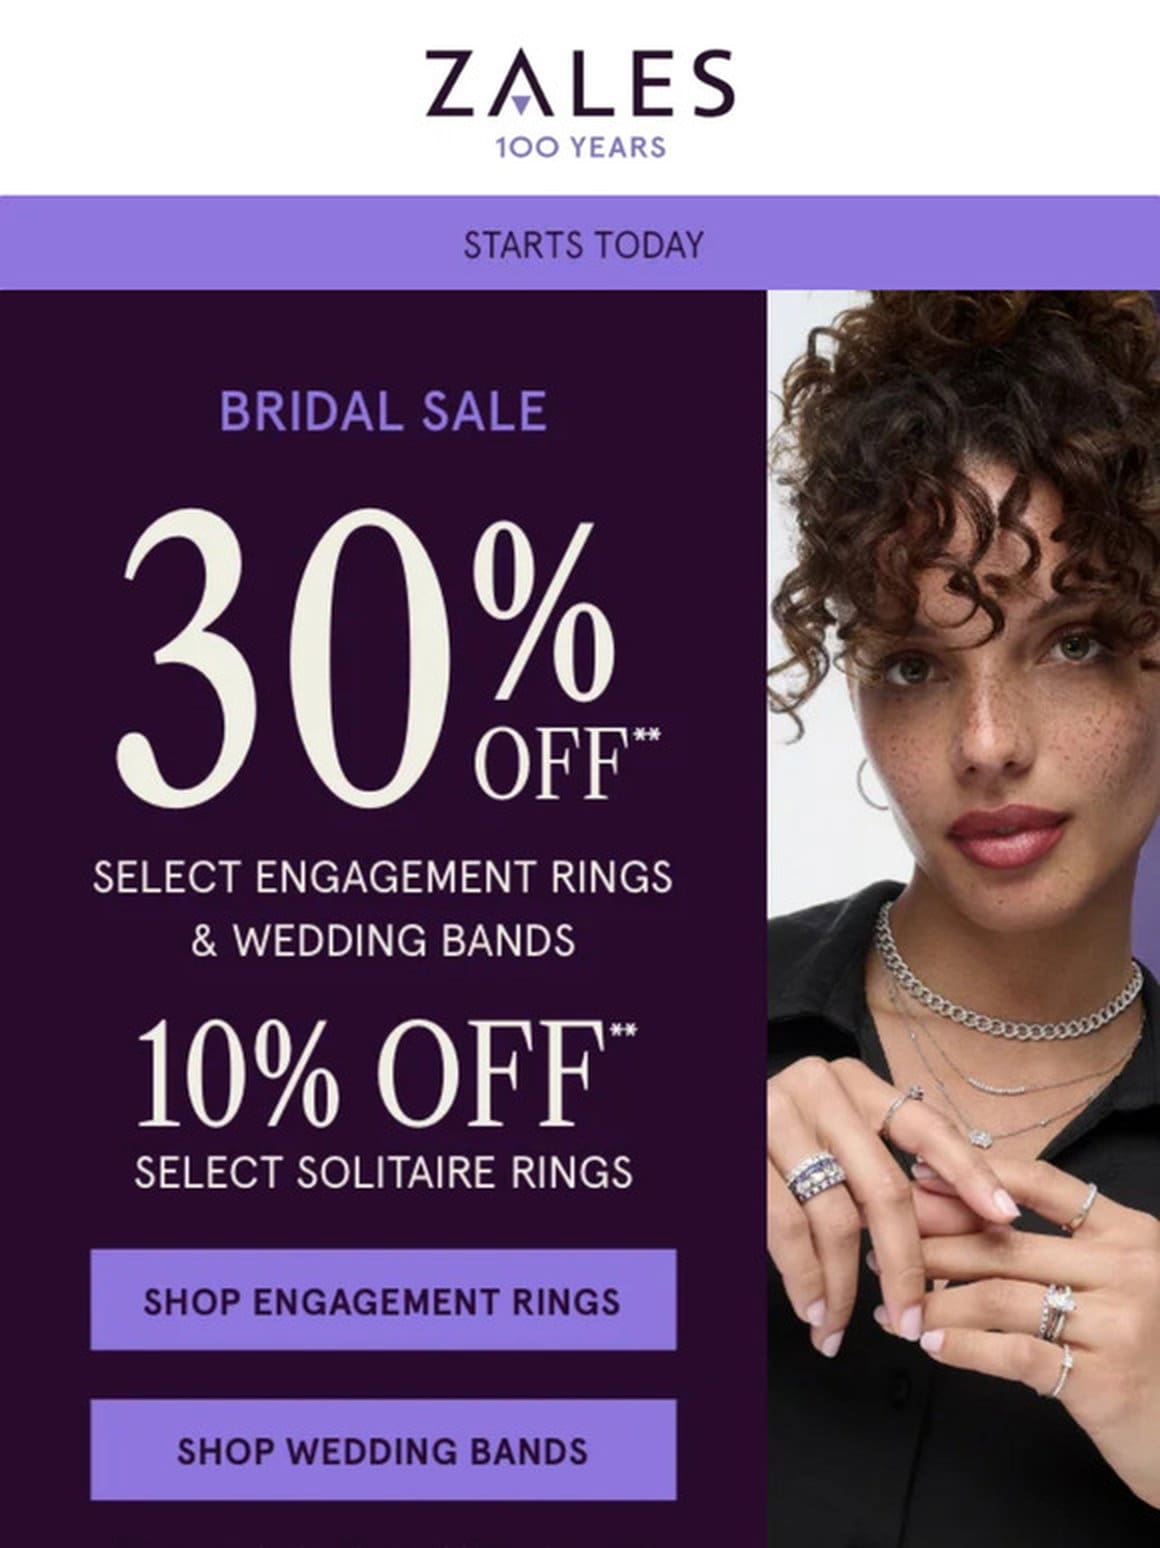 You’re Invited: 30% Off** The Bridal Sale!